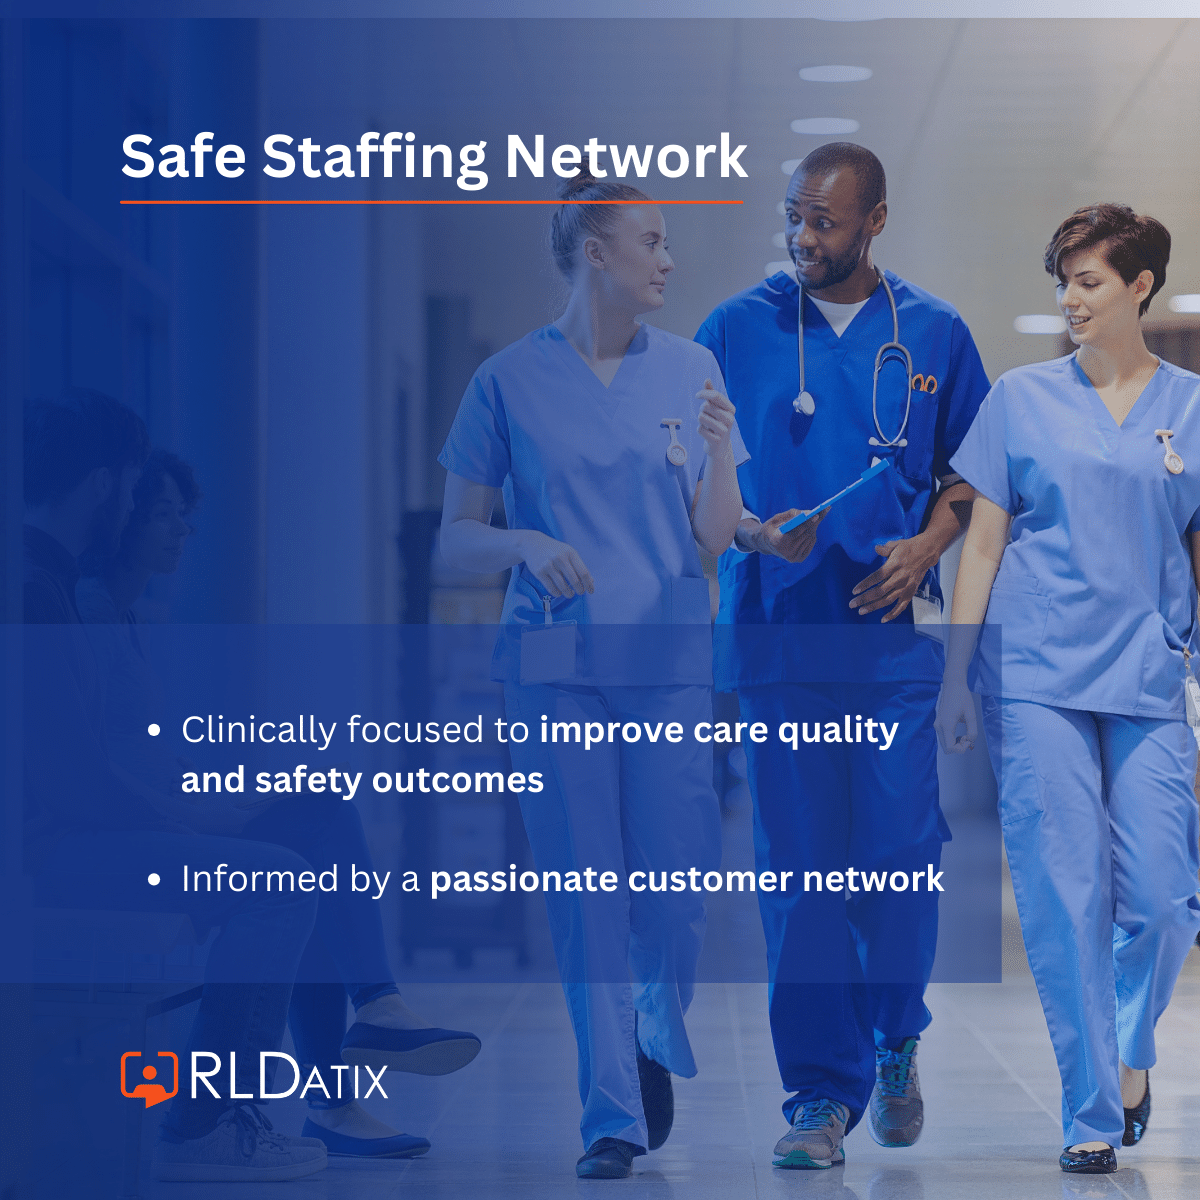 We’re now 5 months into our #SafeStaffingNetwork and we’re really proud of the discussions and learnings coming out of the meetings.​

Join the conversation and become a Network Member today: ow.ly/K22s50RsUaO

#SafeCare #RLDatix #QualityCare #BestPractice